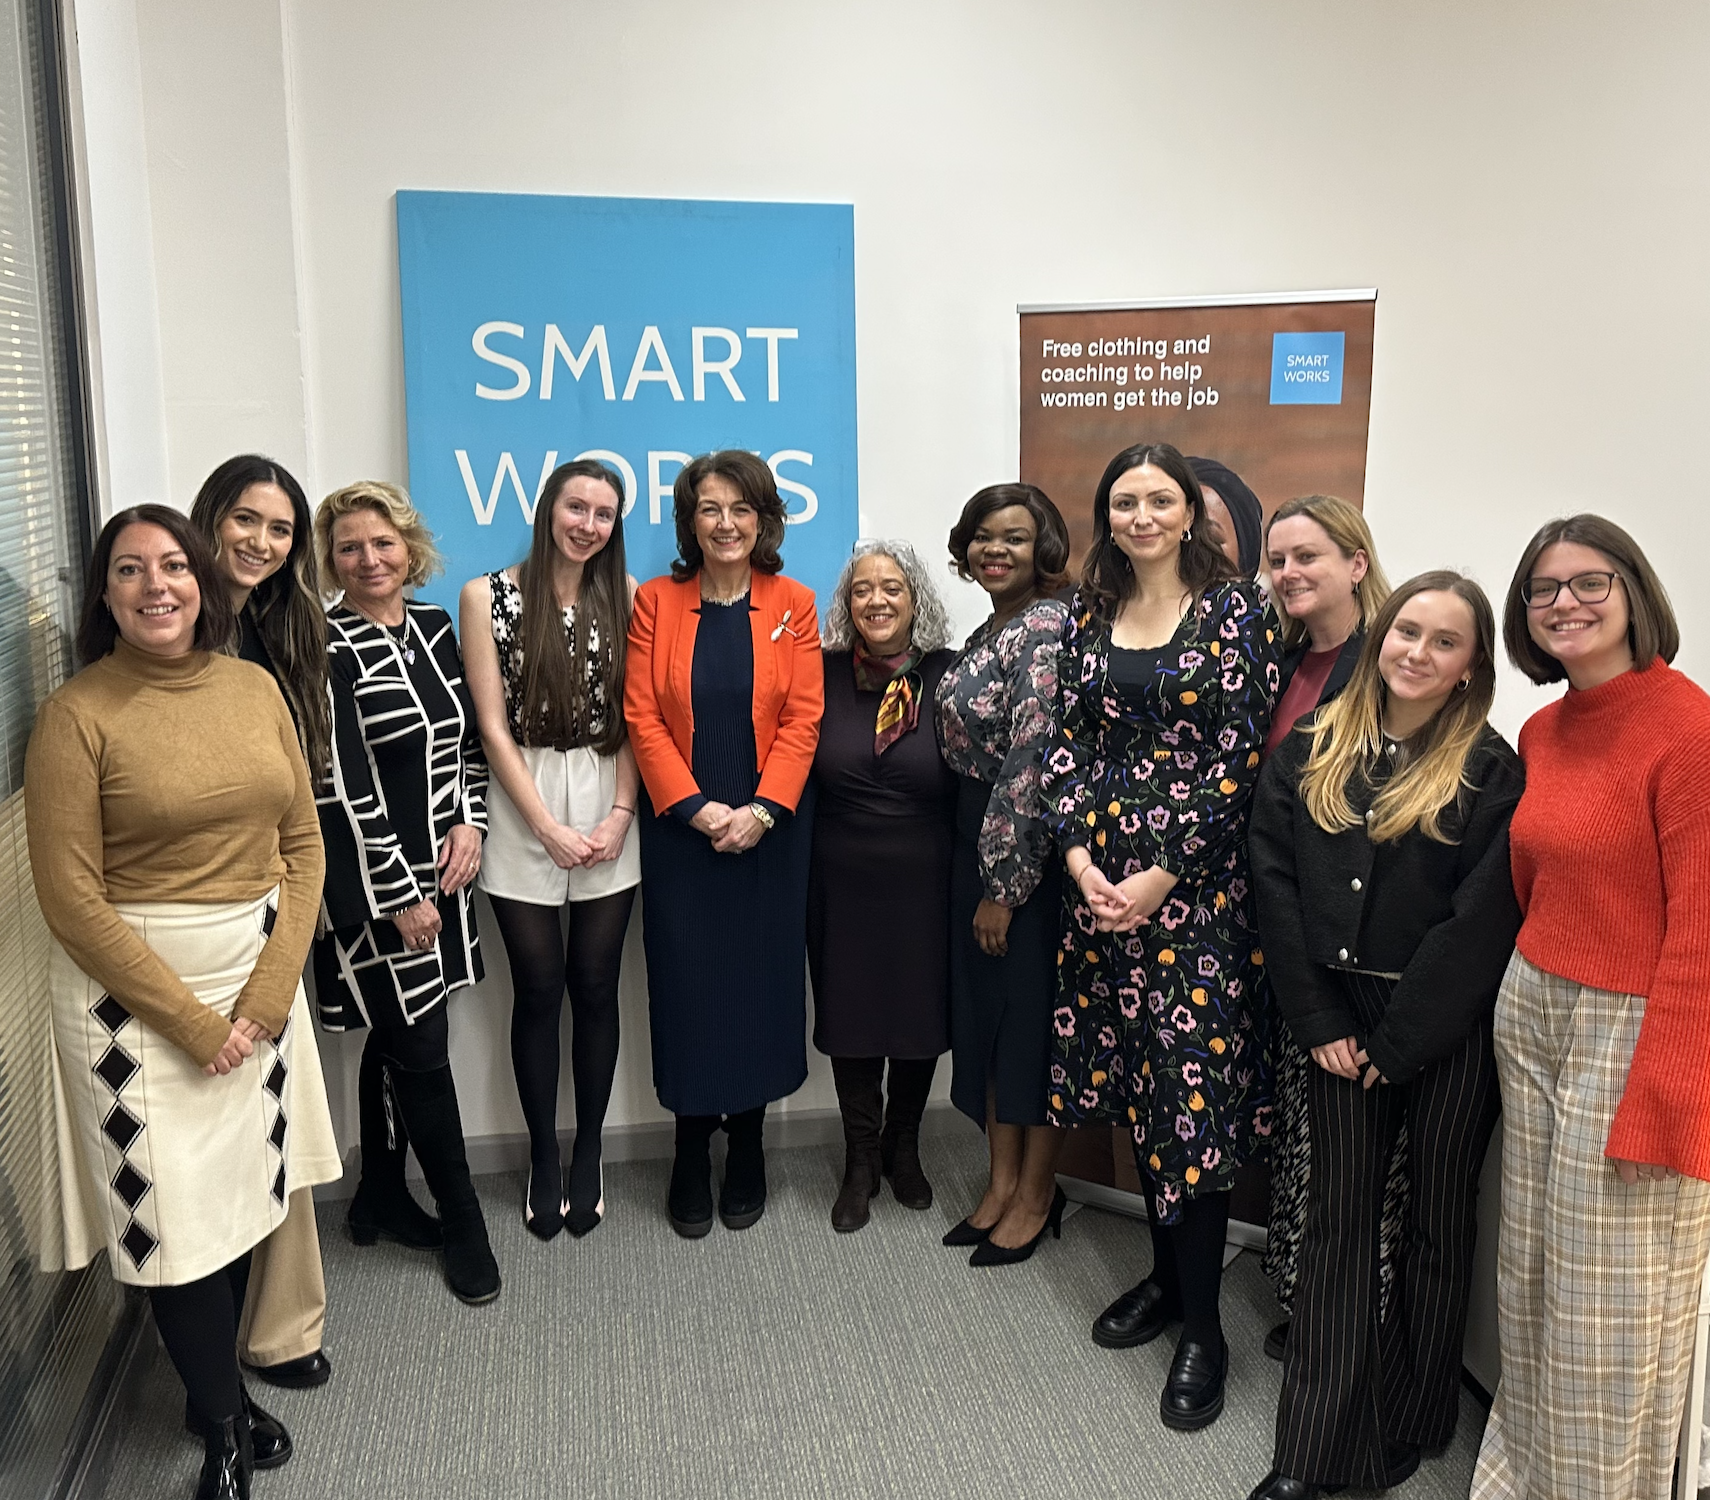 The Minister for Employment visits Smart Works Birmingham image